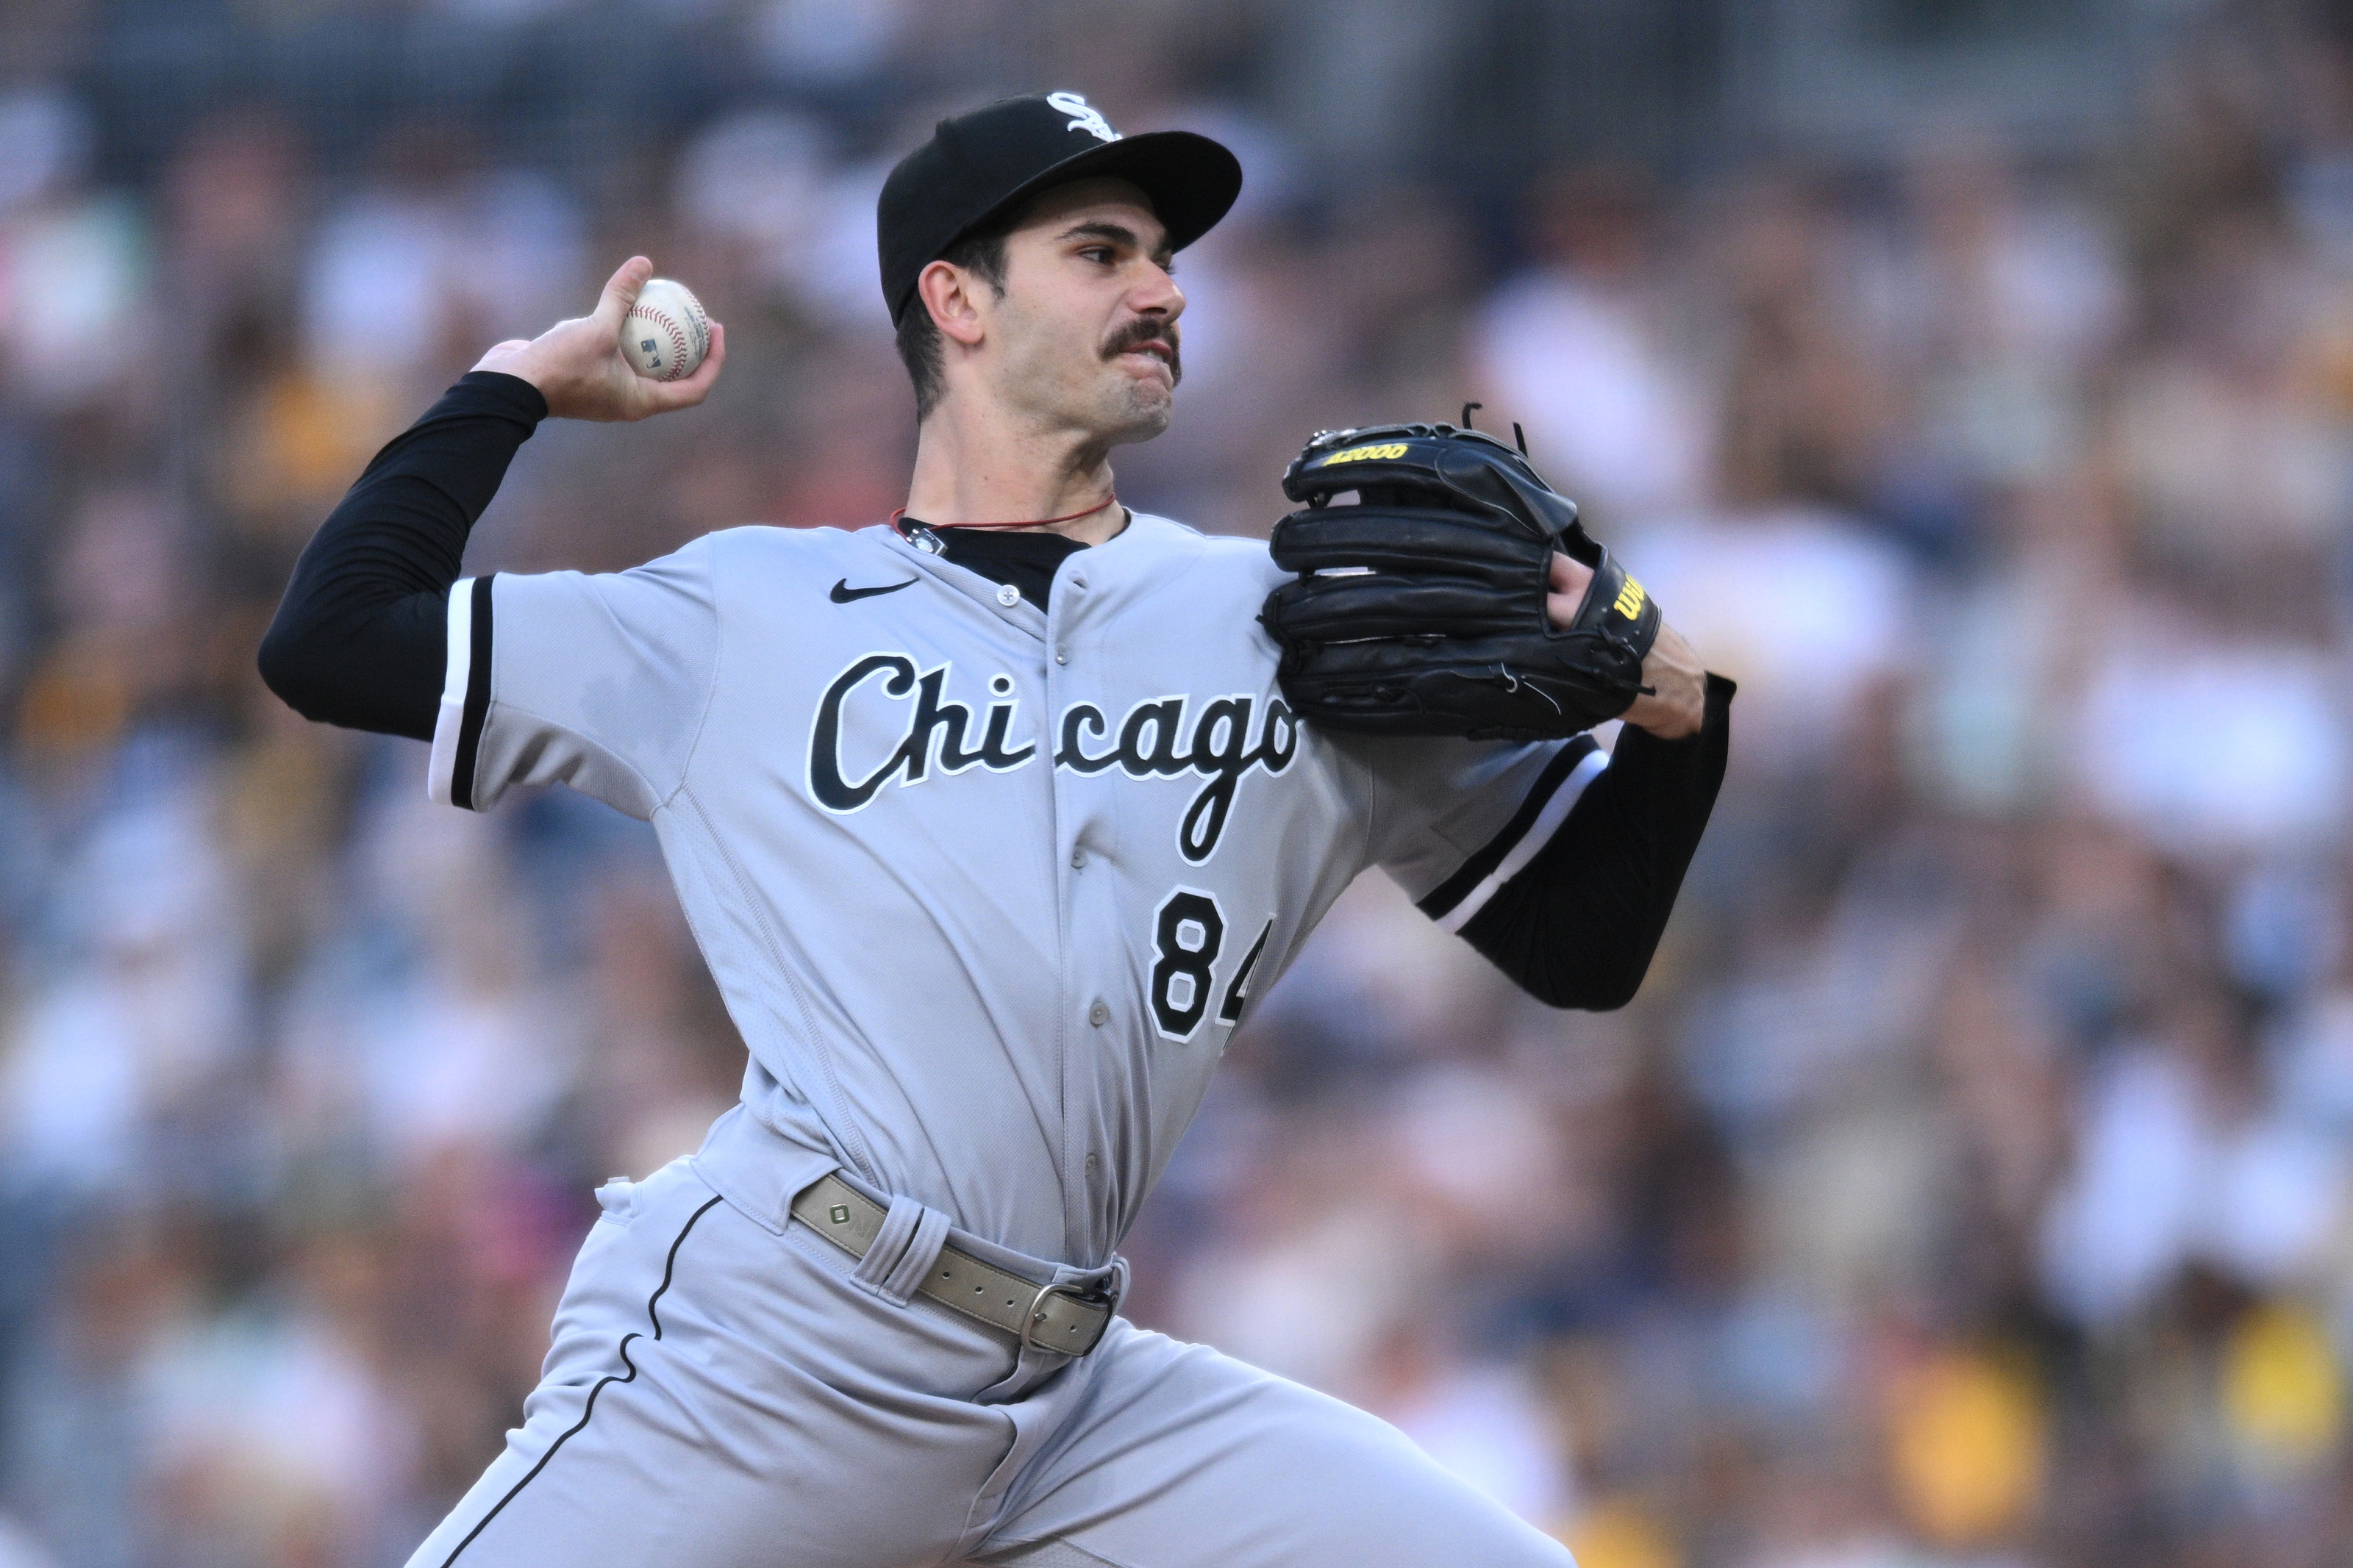 The Chicago White Sox starting rotation is questionable behind